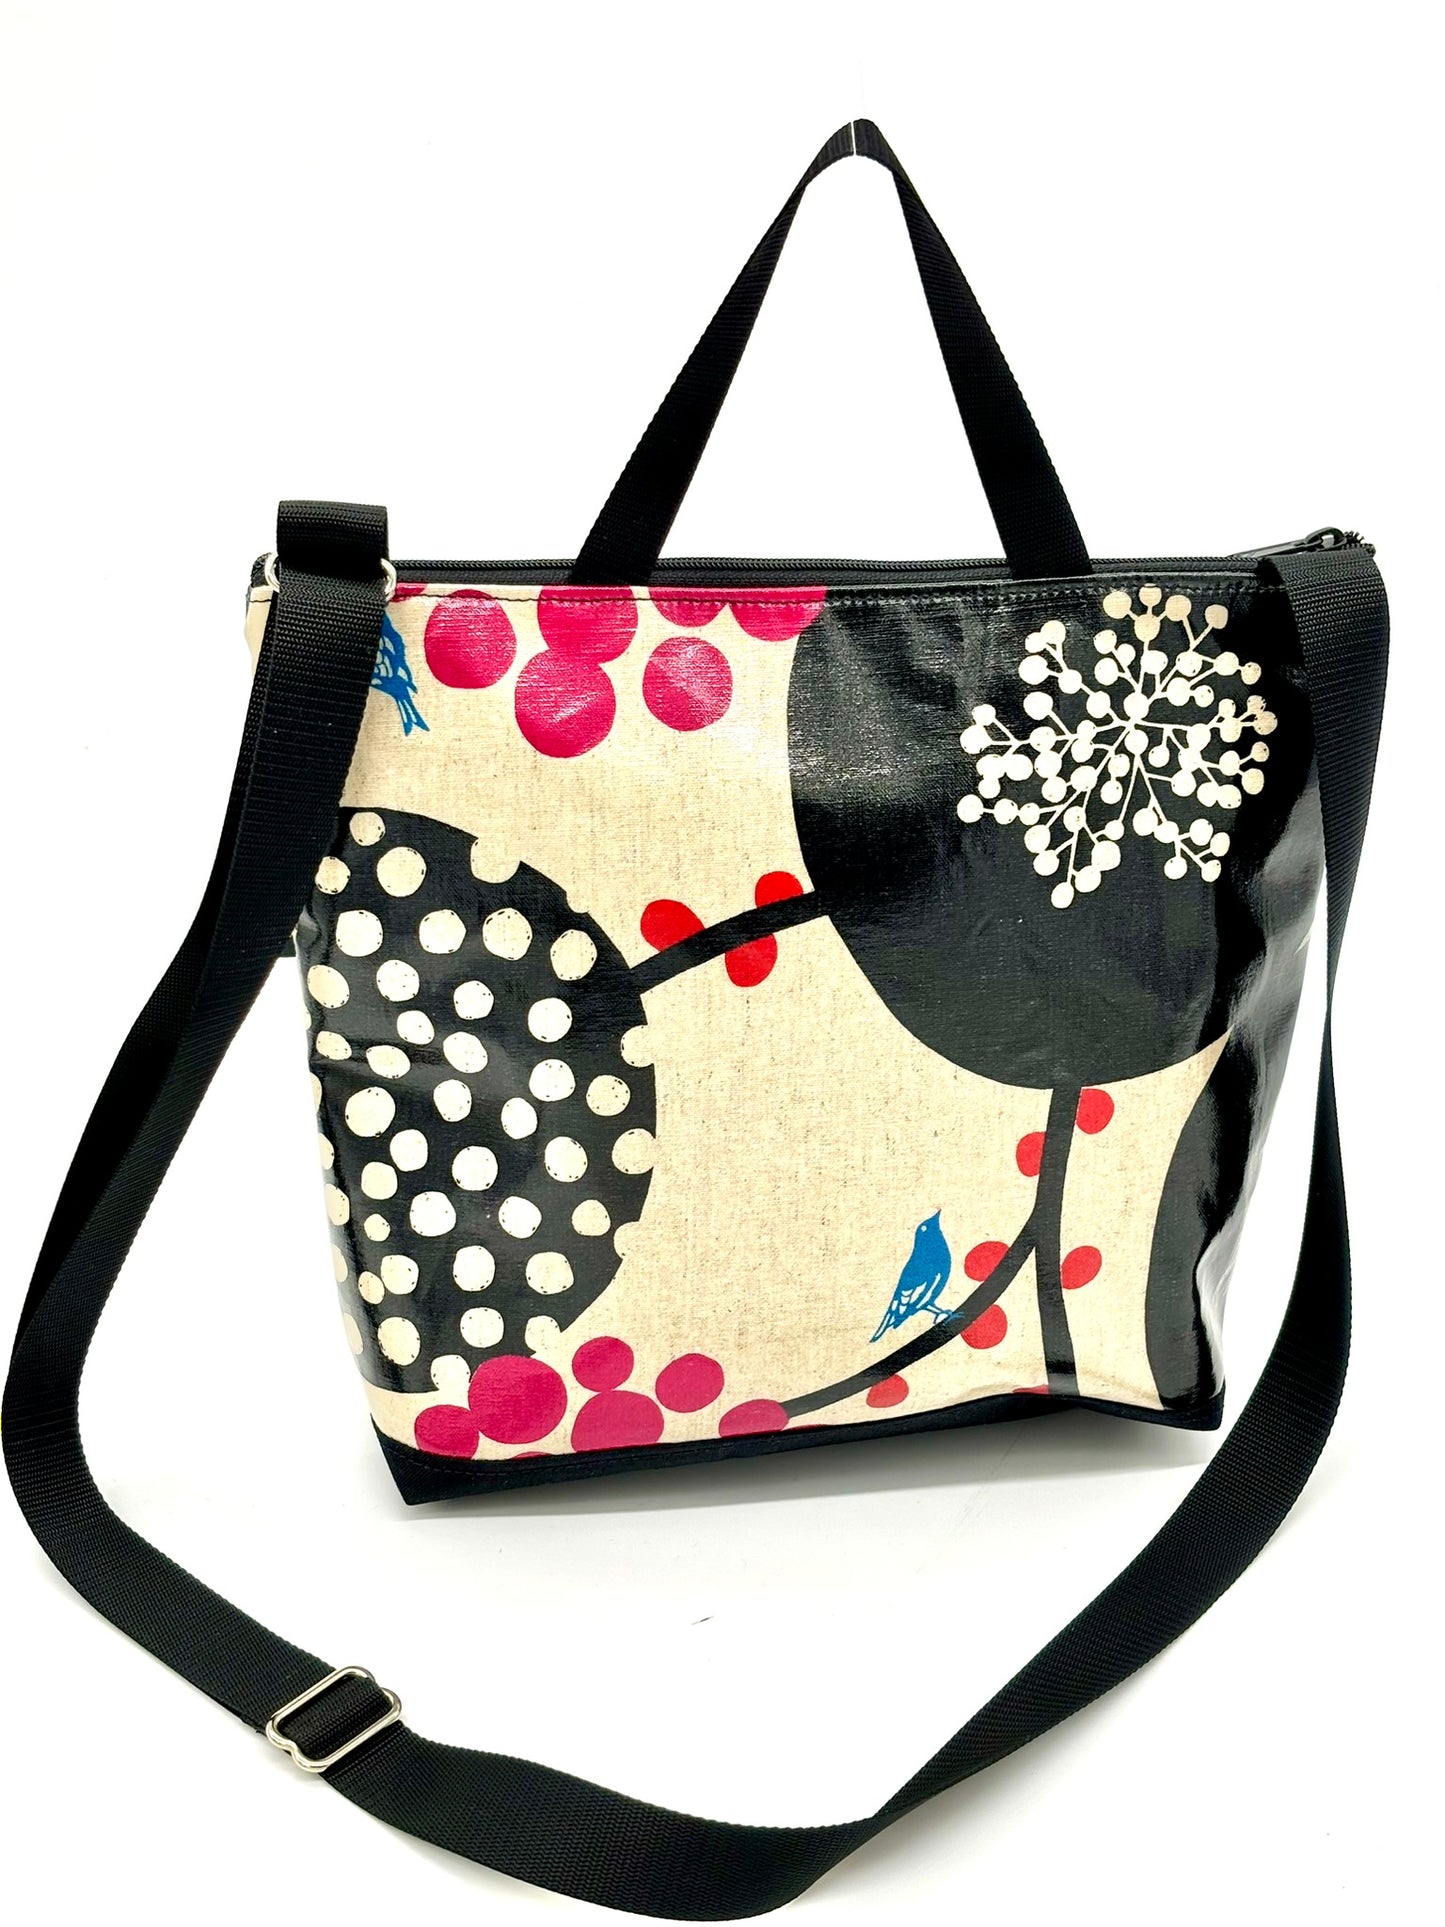 Large Travel Purse in Pink Berries